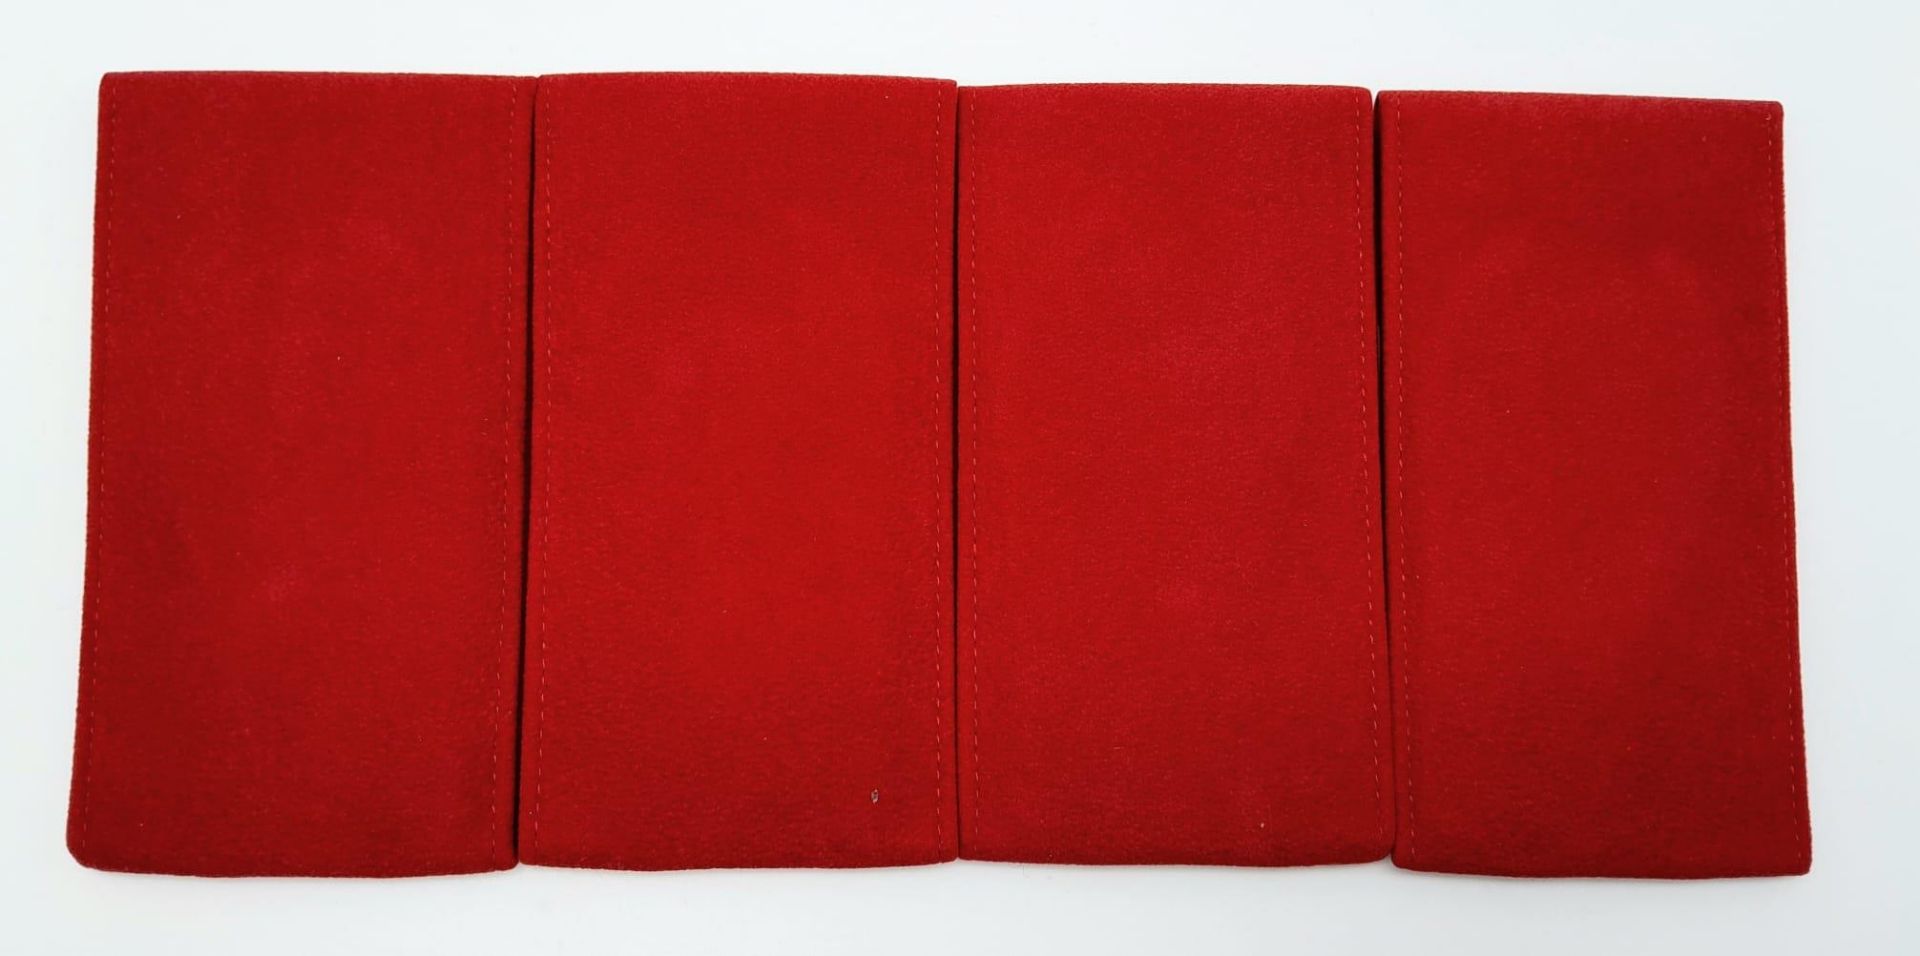 Four CARTIER service pocket pouches, with inserts, ideal for traveling or protecting your valuable - Image 2 of 3